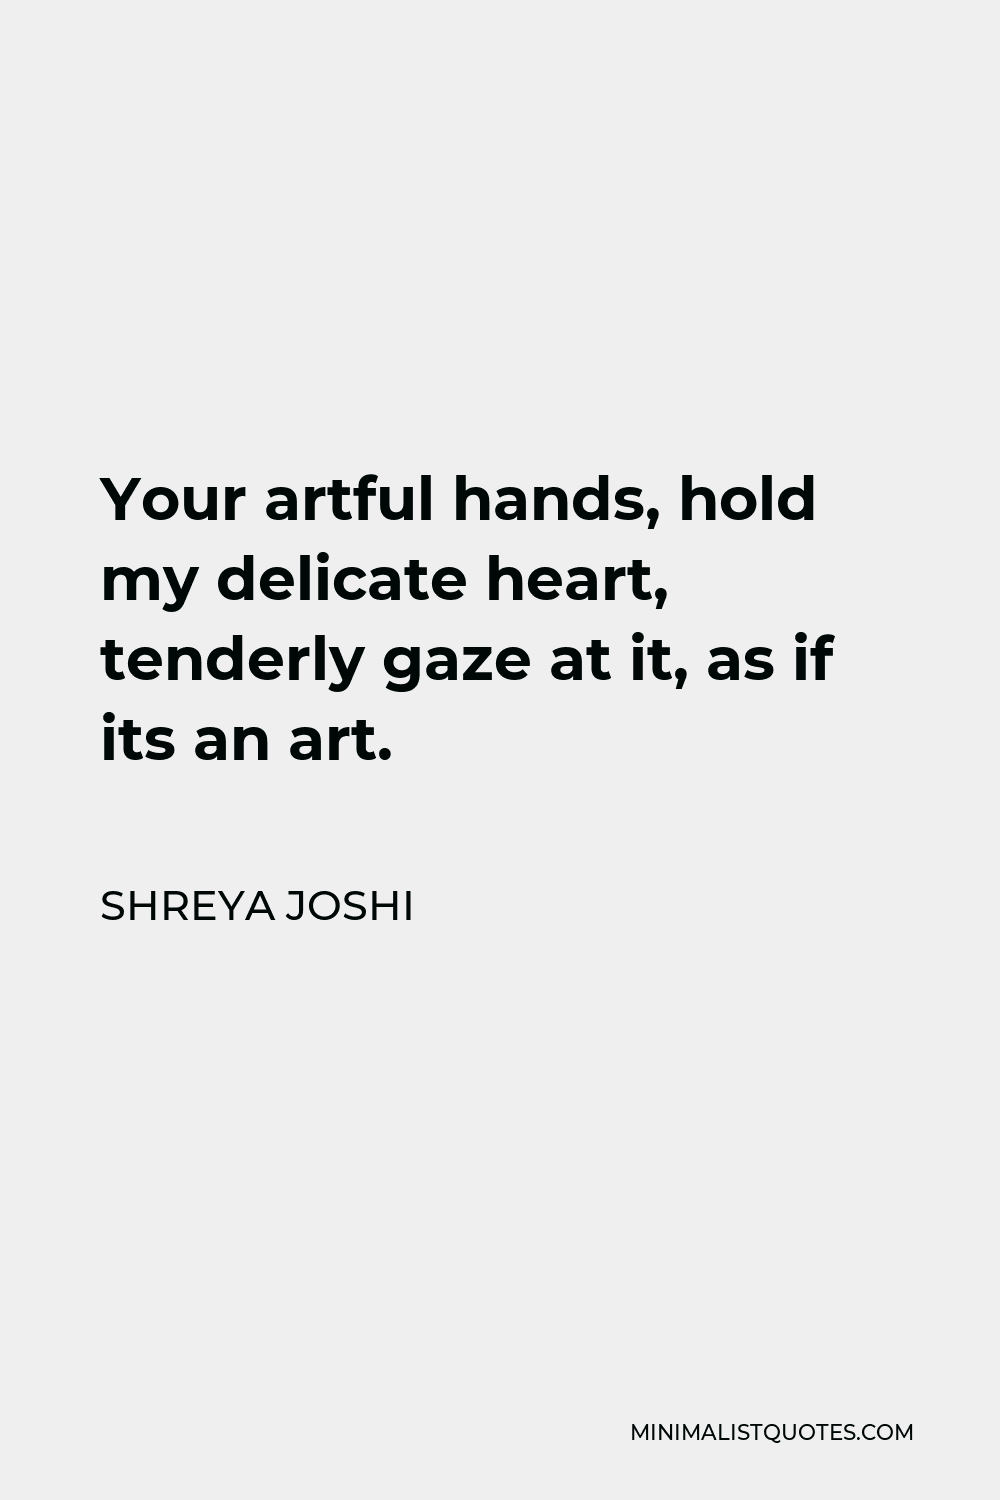 Shreya Joshi Quote - Your artful hands, hold my delicate heart, tenderly gaze at it, as if its an art.